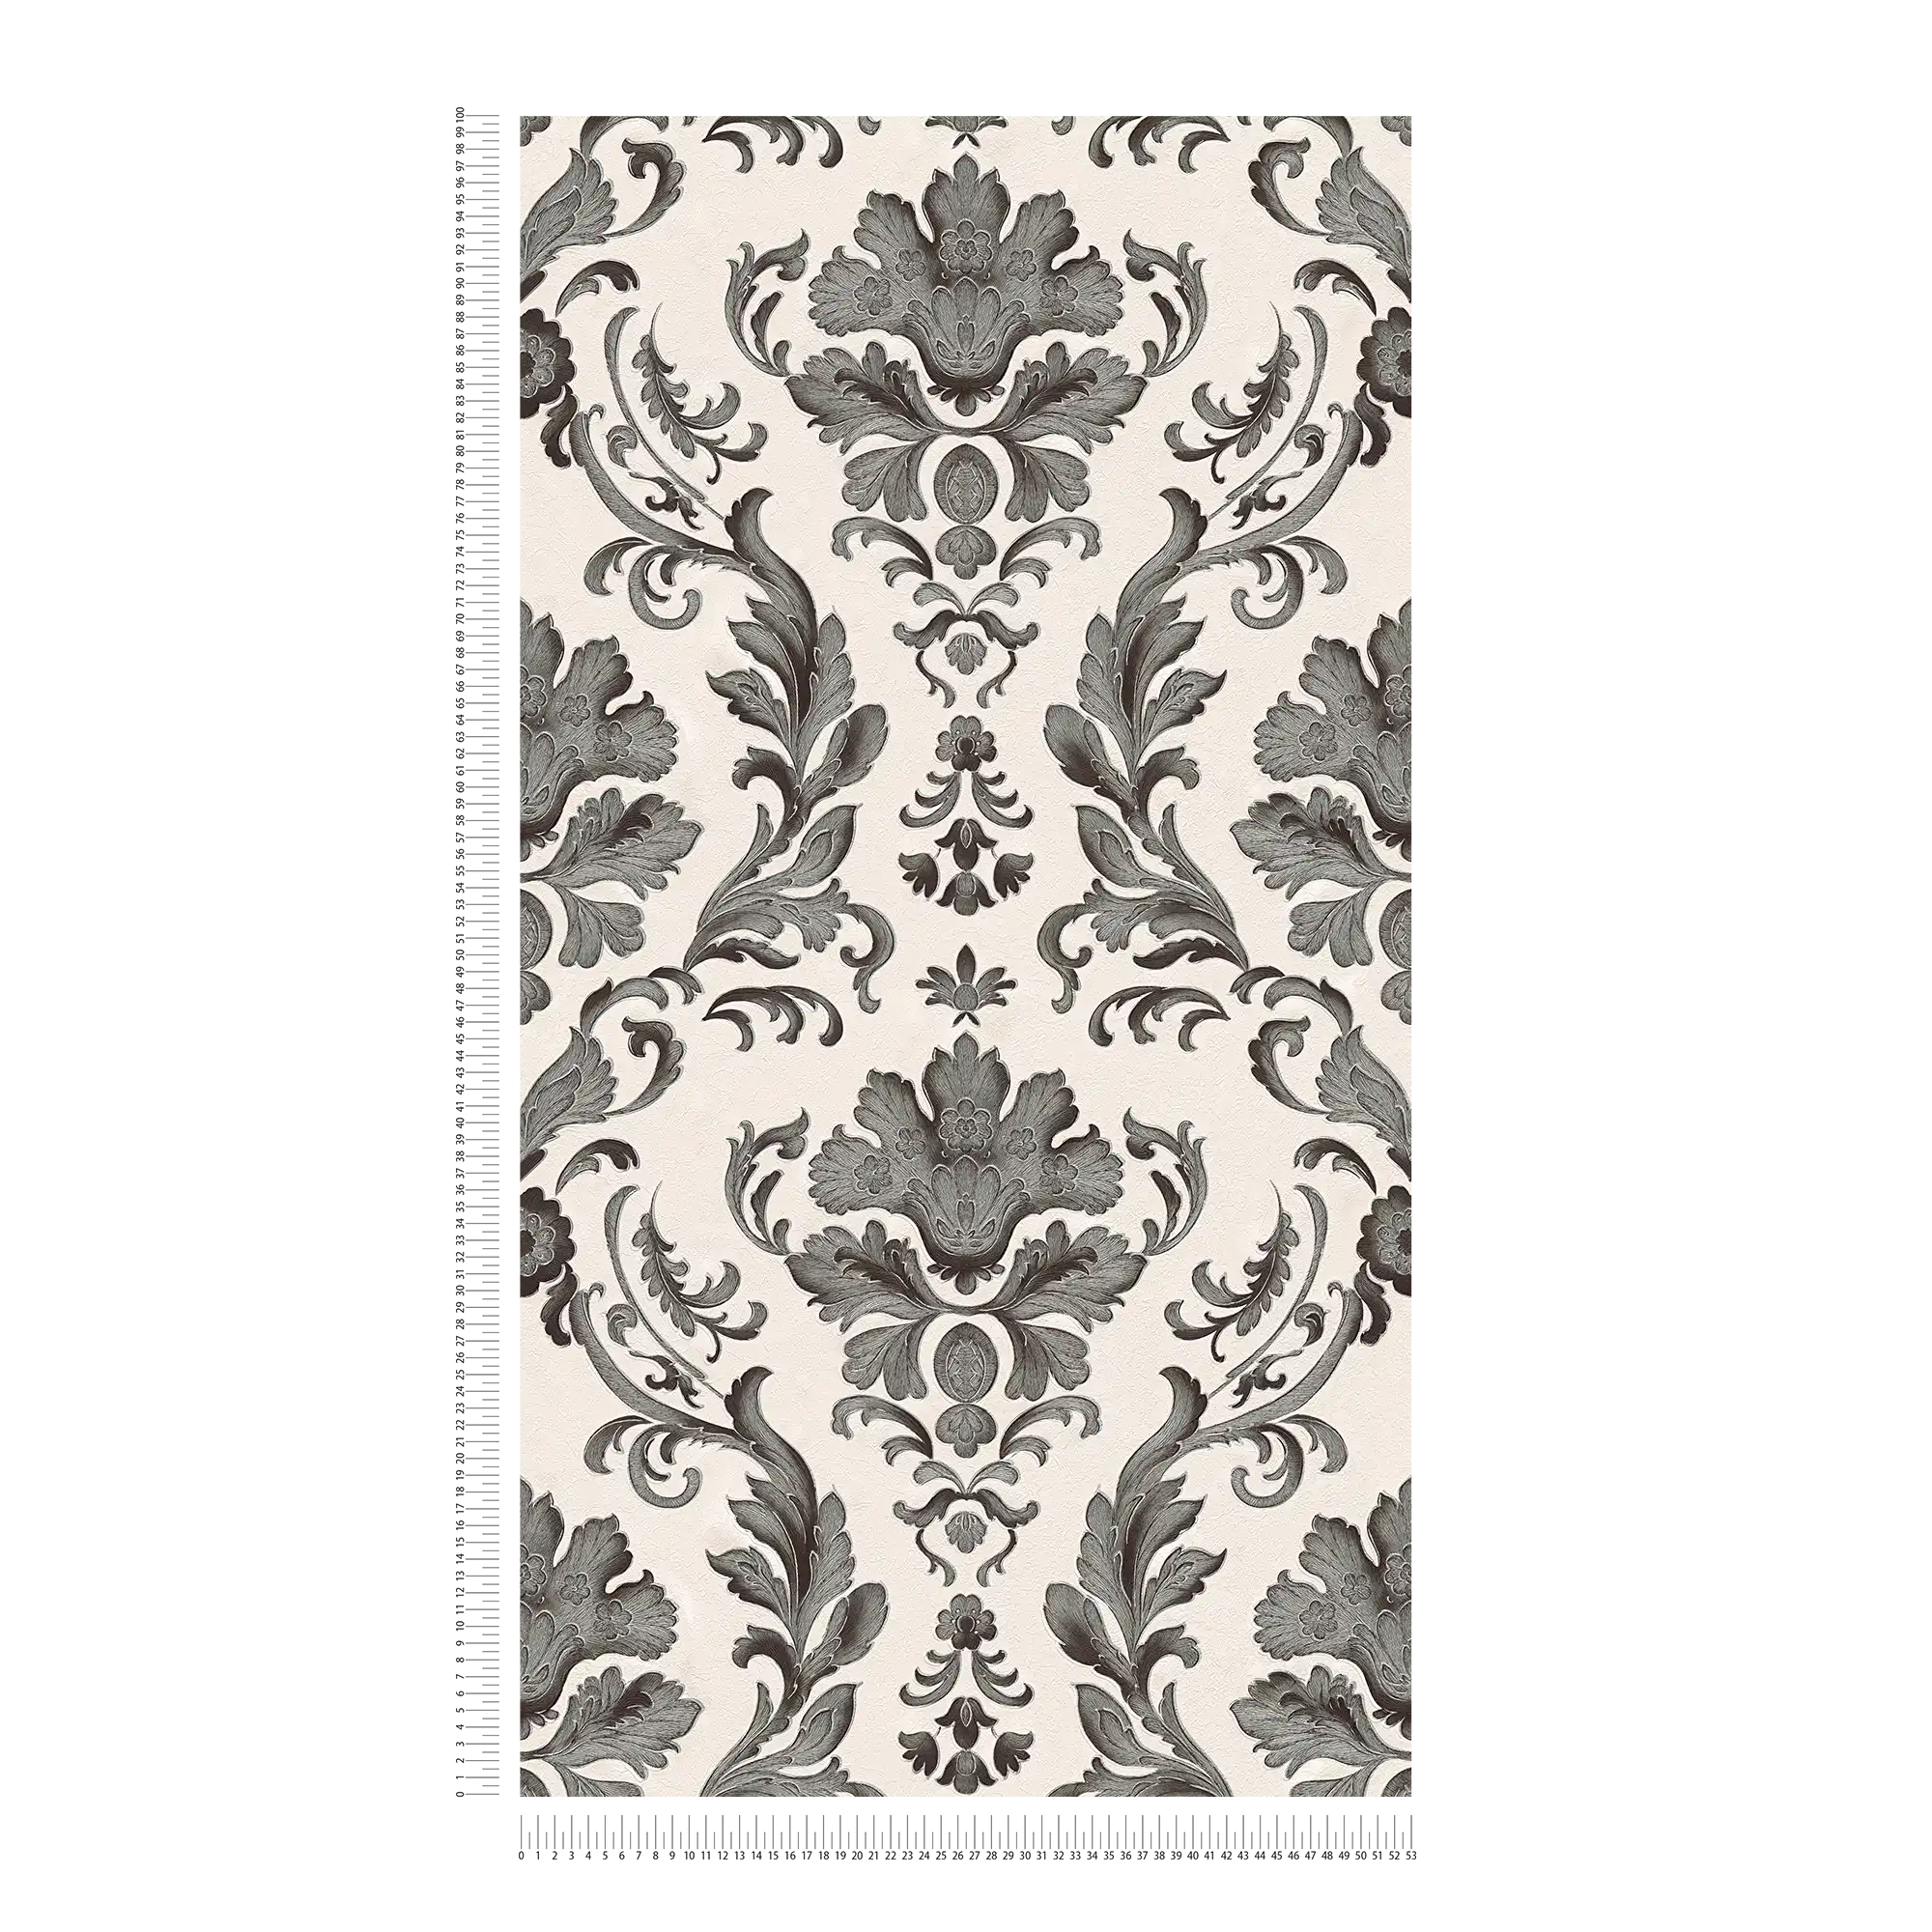             Wallpaper with detailed ornaments in floral style - black, white
        